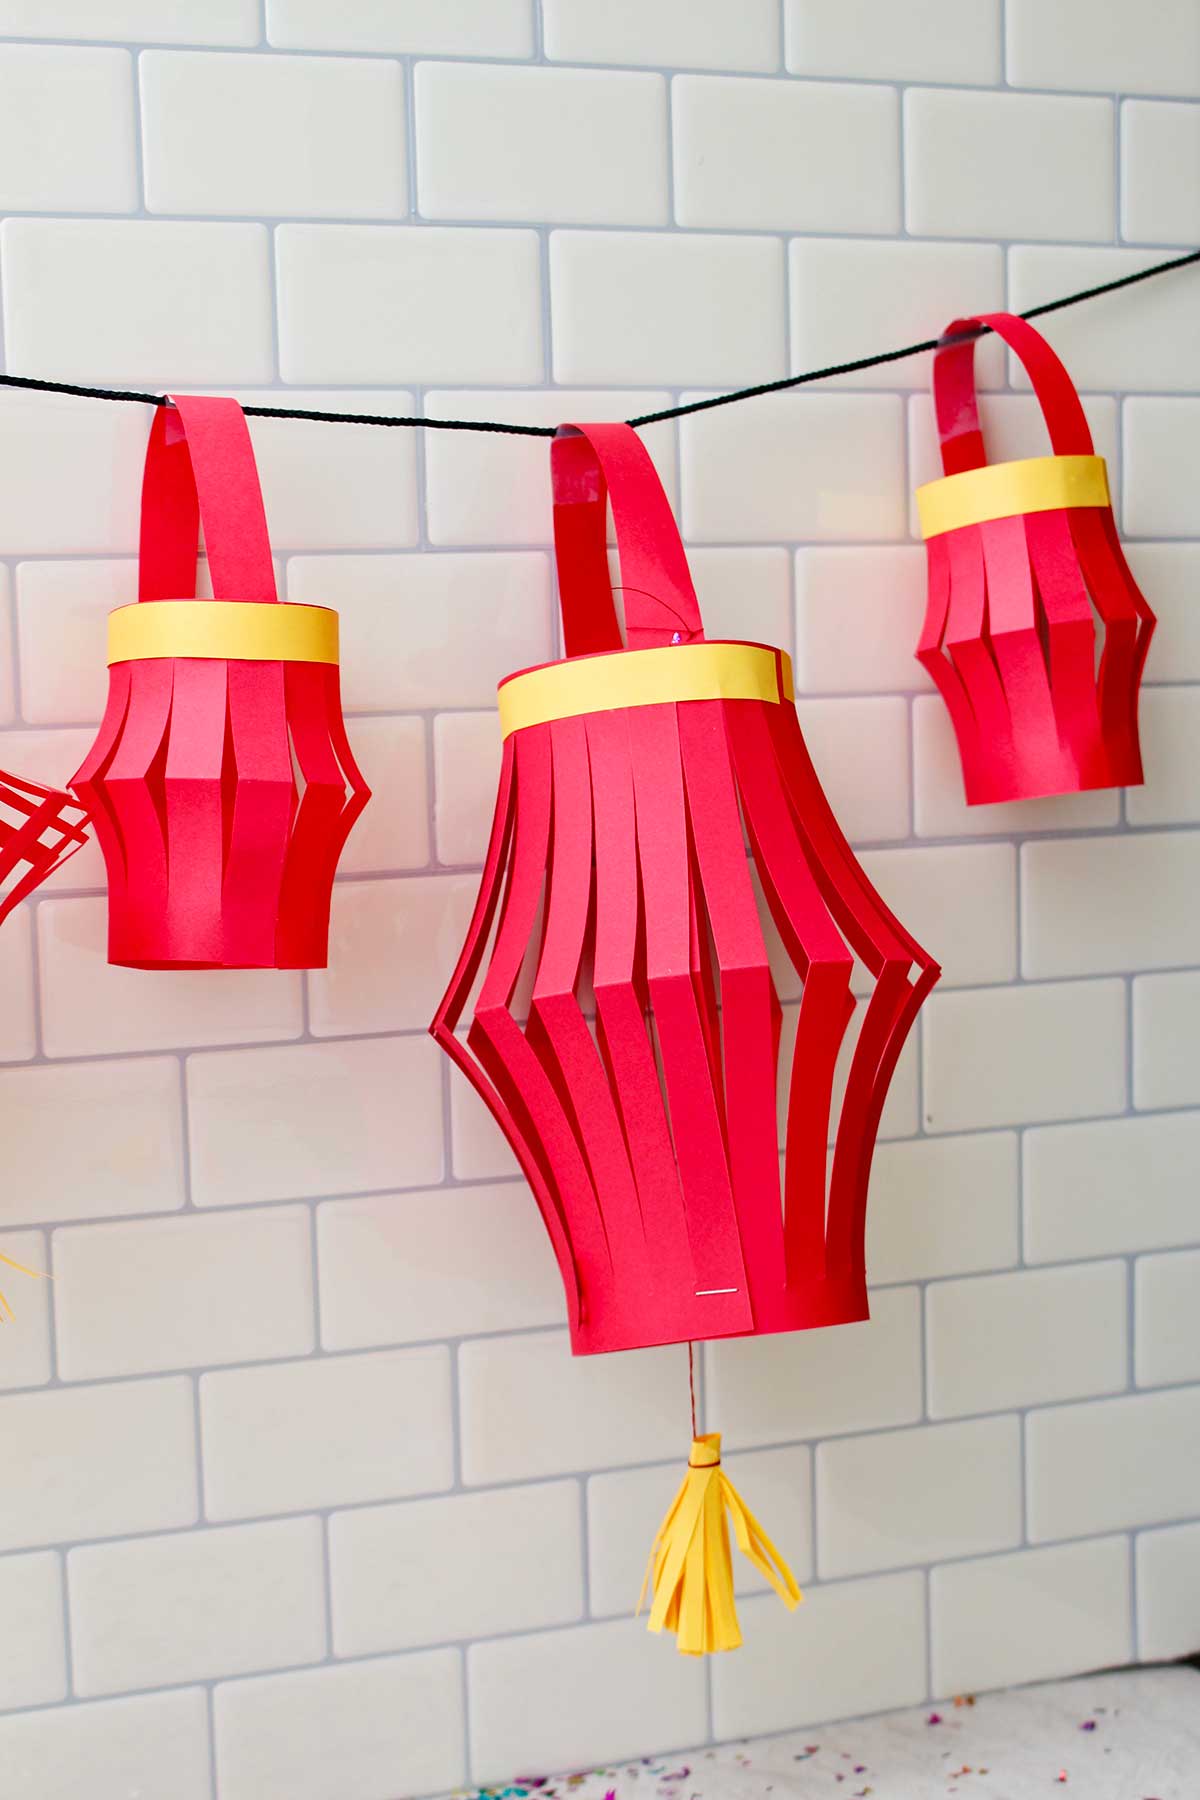 Three completed paper lanterns hanging against a subway tile backdrop.